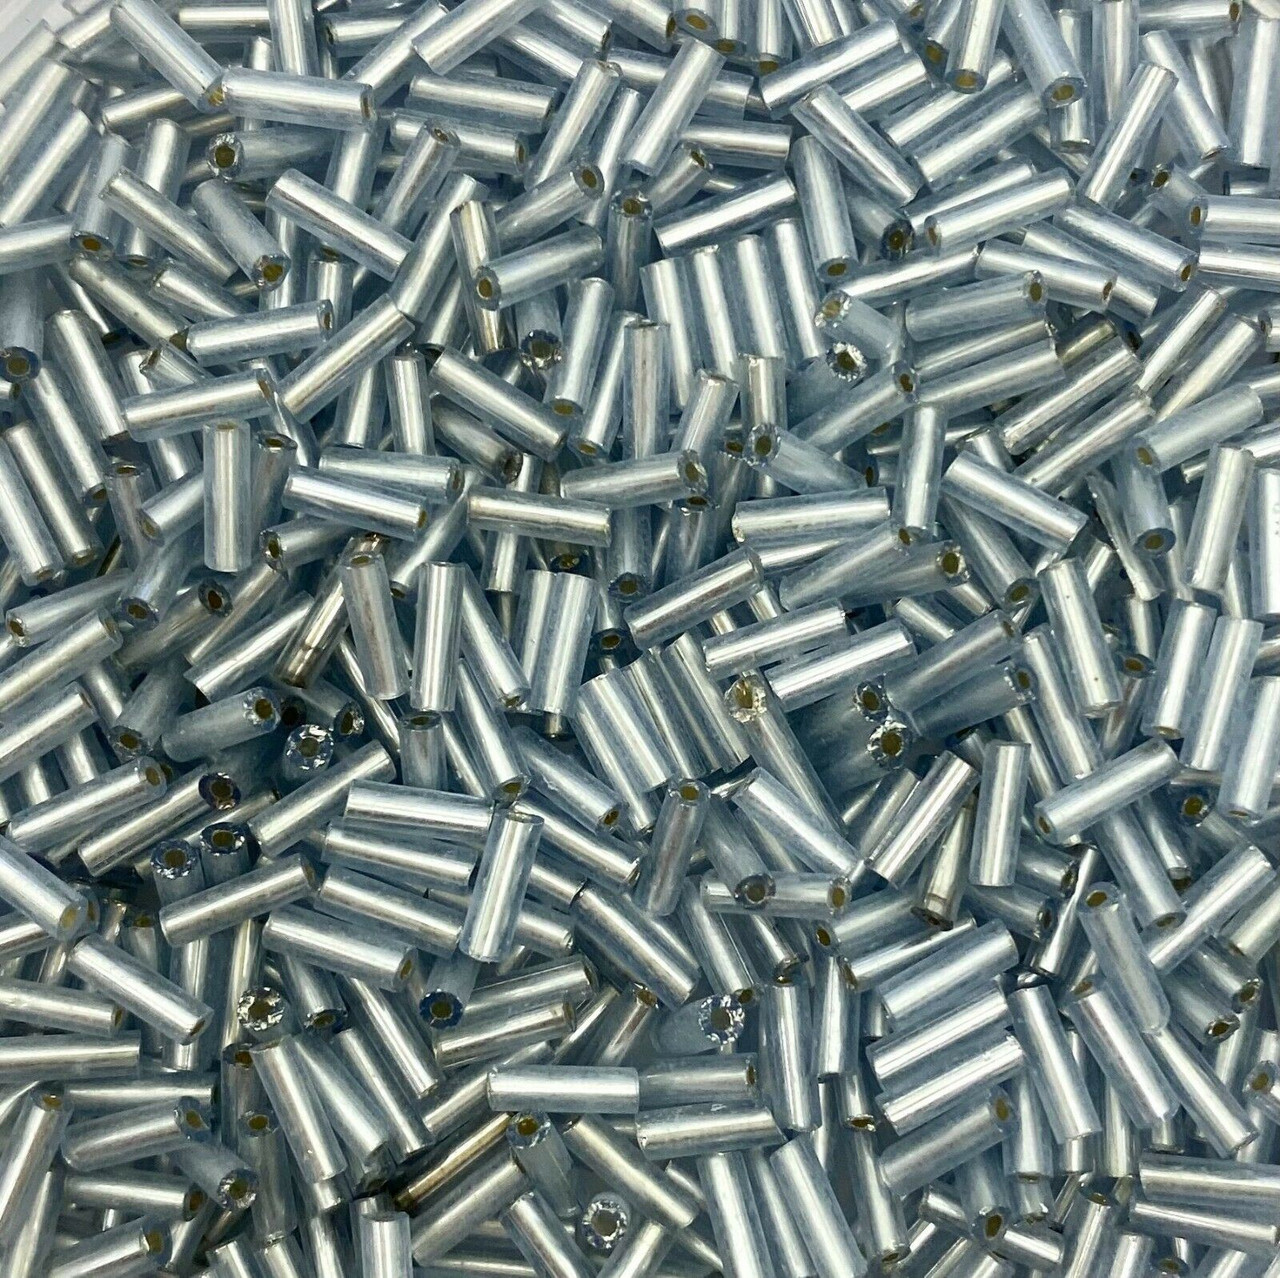 50g glass bugle beads - Light Grey Silver-Lined - approx 6mm